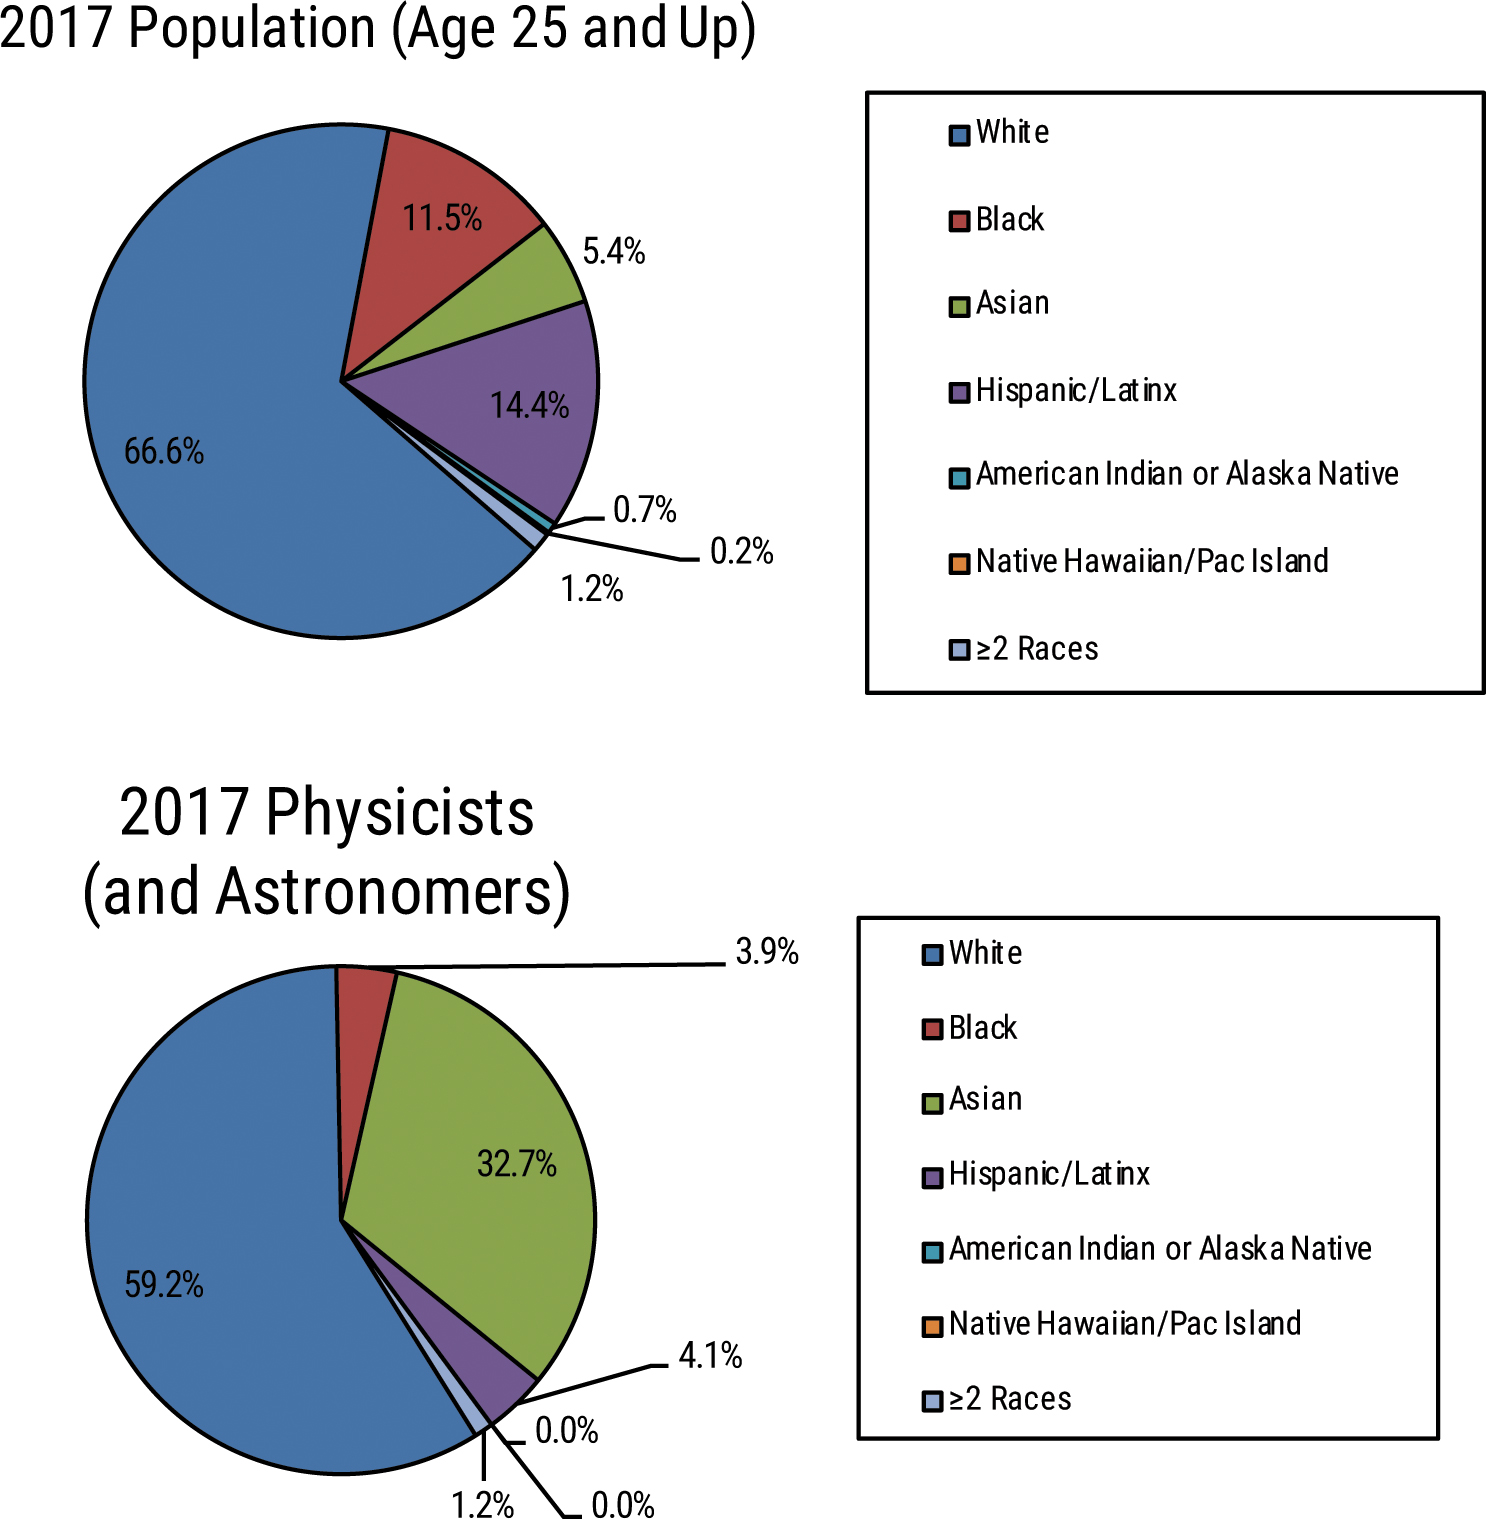 Pie charts comparing racial identification of U.S. population to the racial identification of U.S. physicists and astronomers